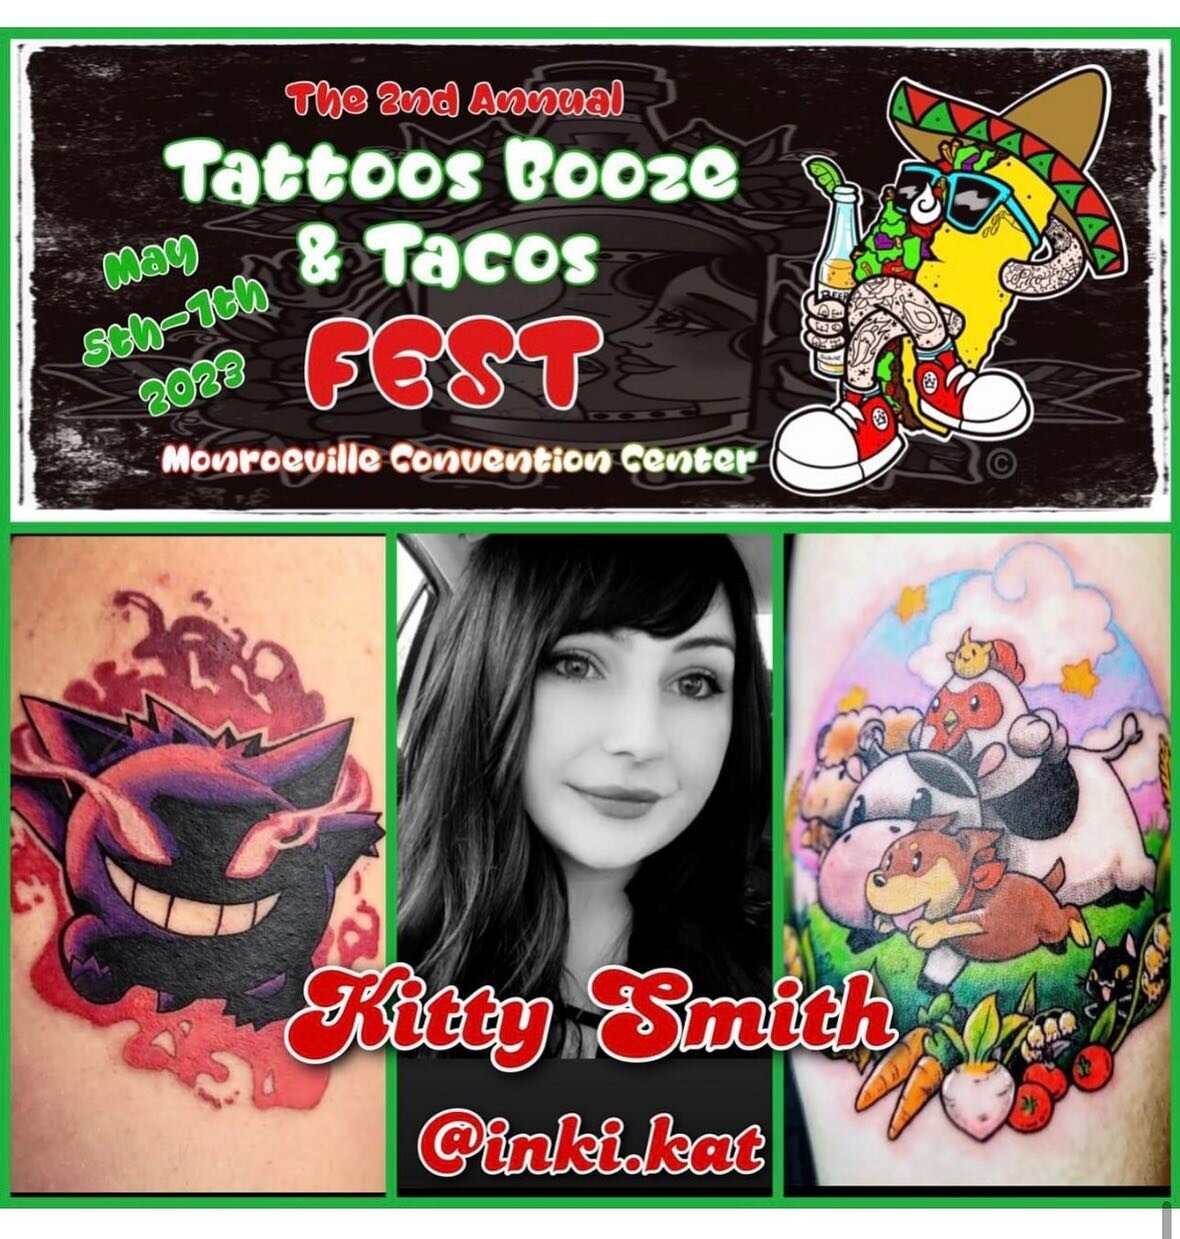 Come see @inki.kat &amp; Black Oak Artistry at our booth at this years convention in Monroeville. 
@tattoos_booze_tacos_fest May 5,6,7. Flash designs, custom designs and a giveaway 👍